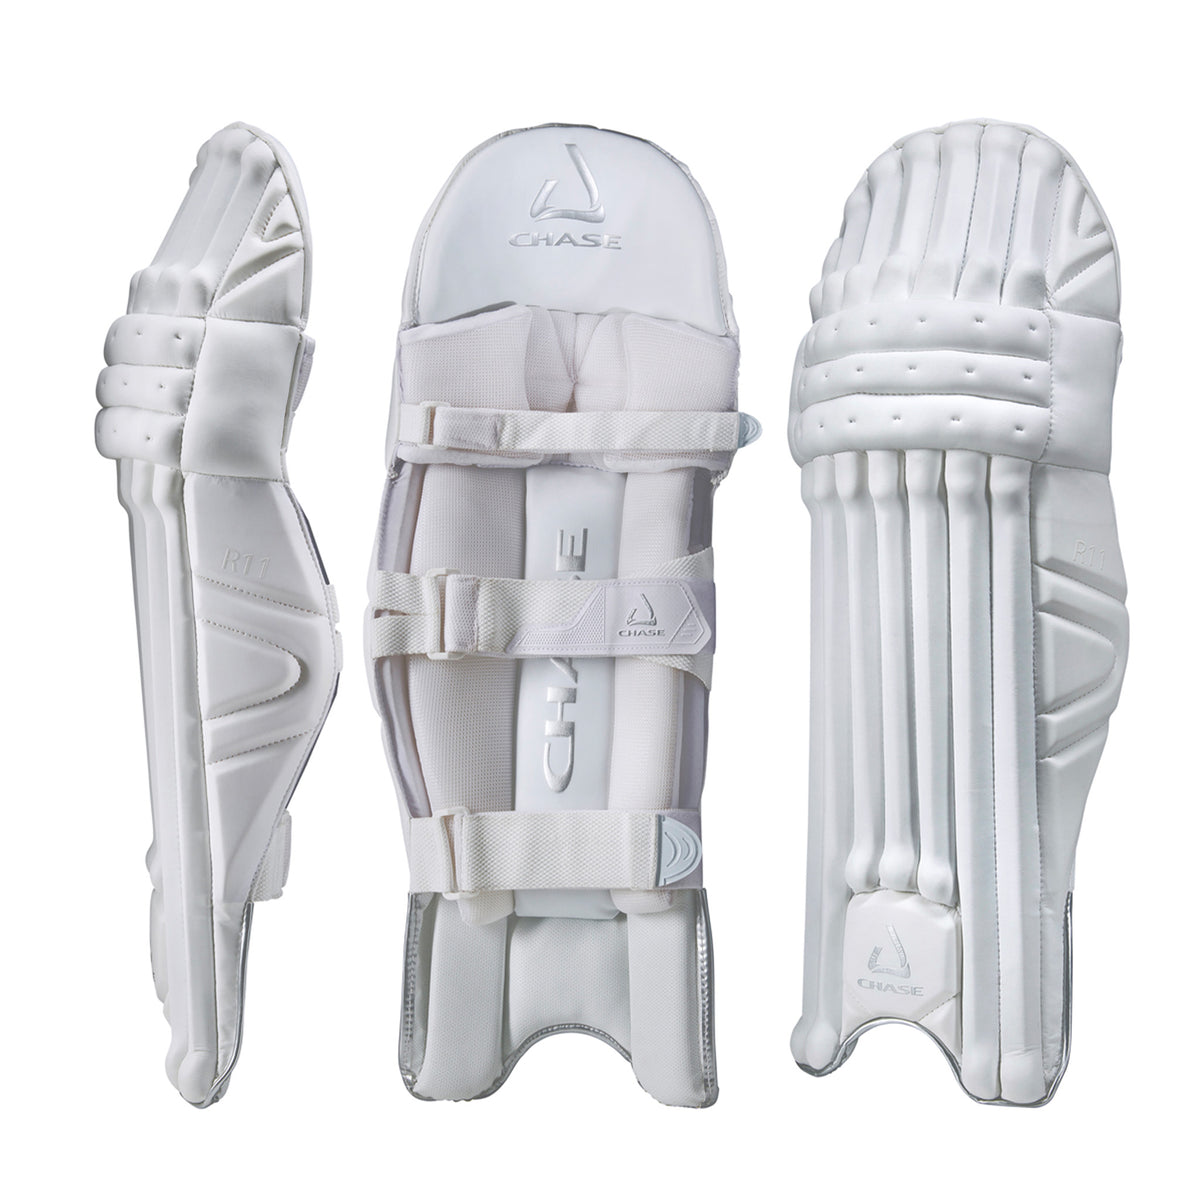 Chase R11 Batting Pads